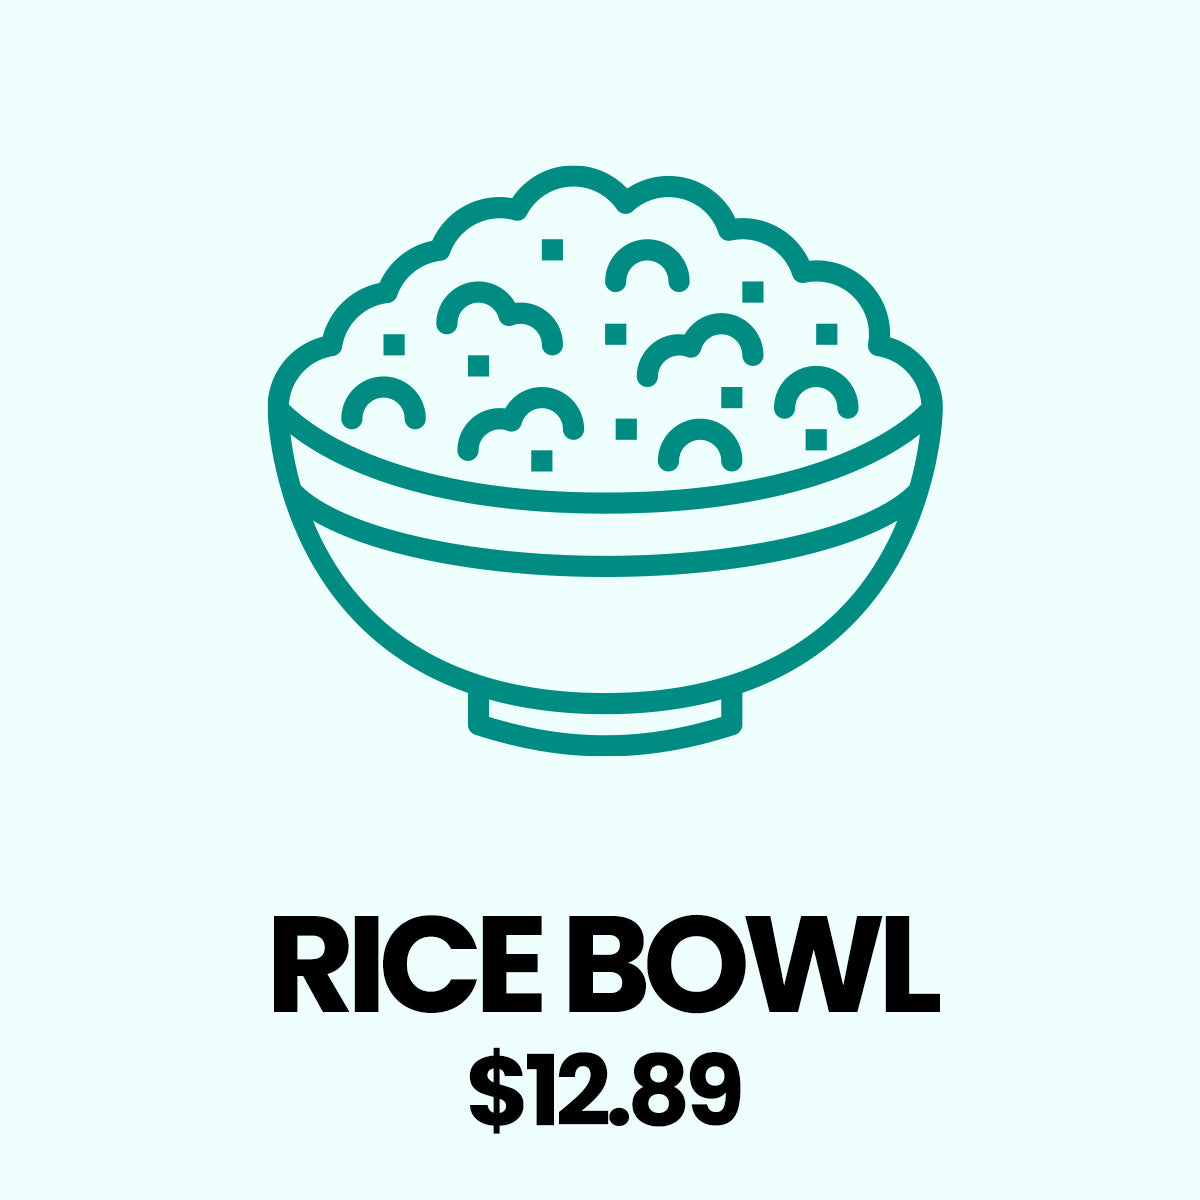 Build Your Own Rice Bowl - $12.89